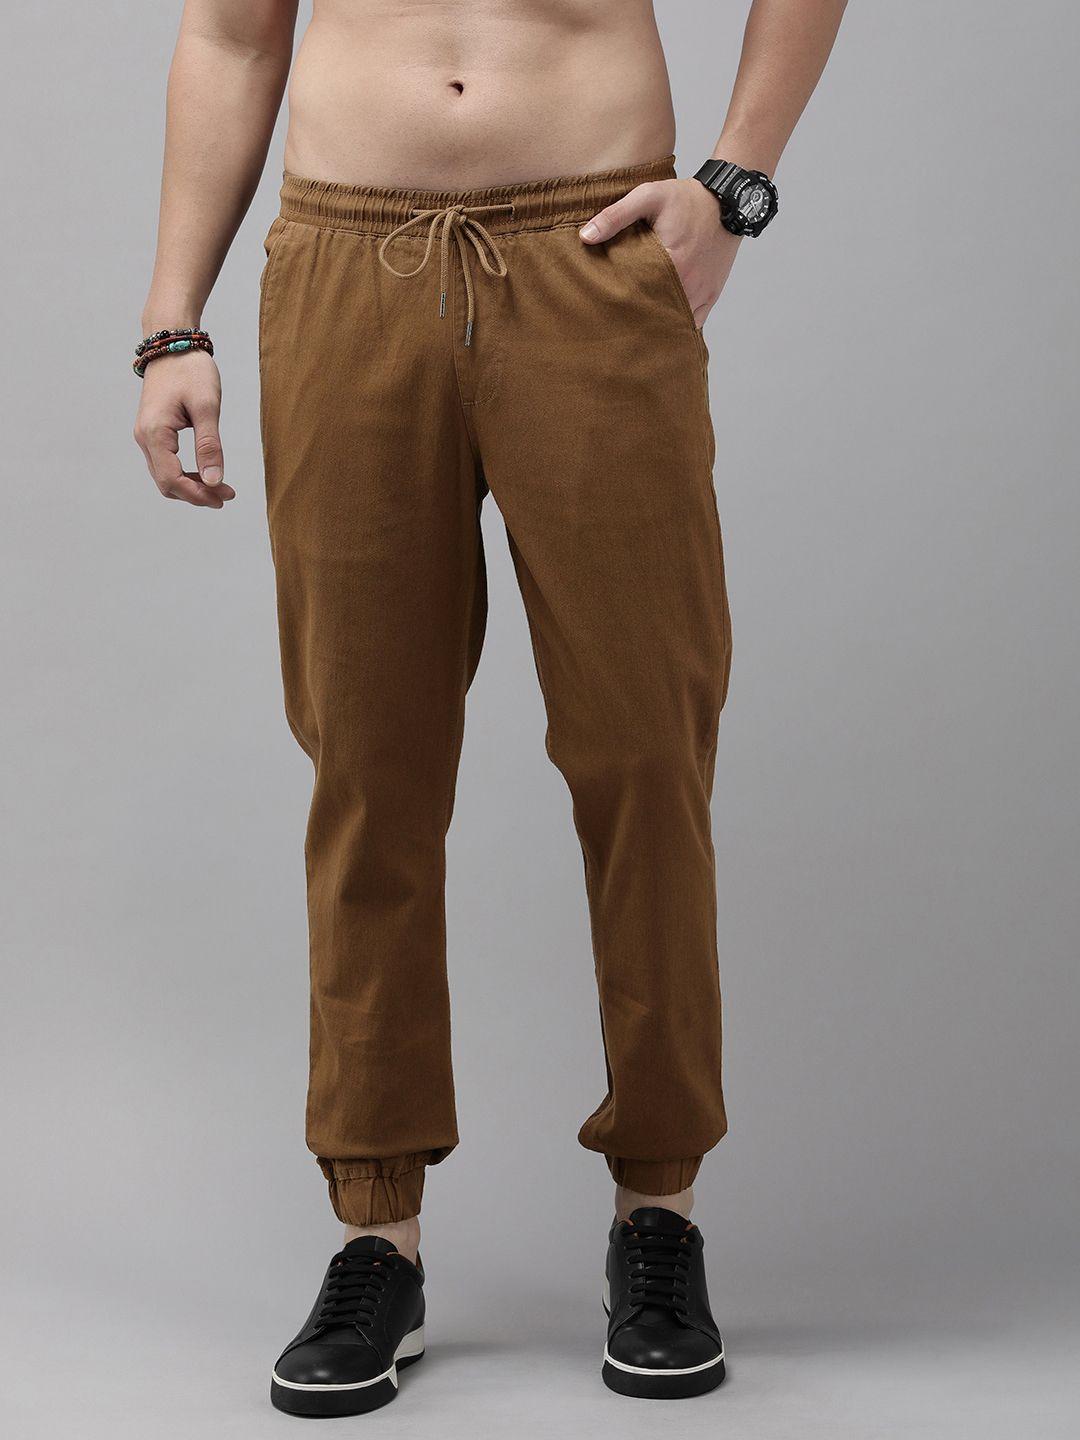 the-roadster-life-co.-men-mid-rise-joggers-trousers